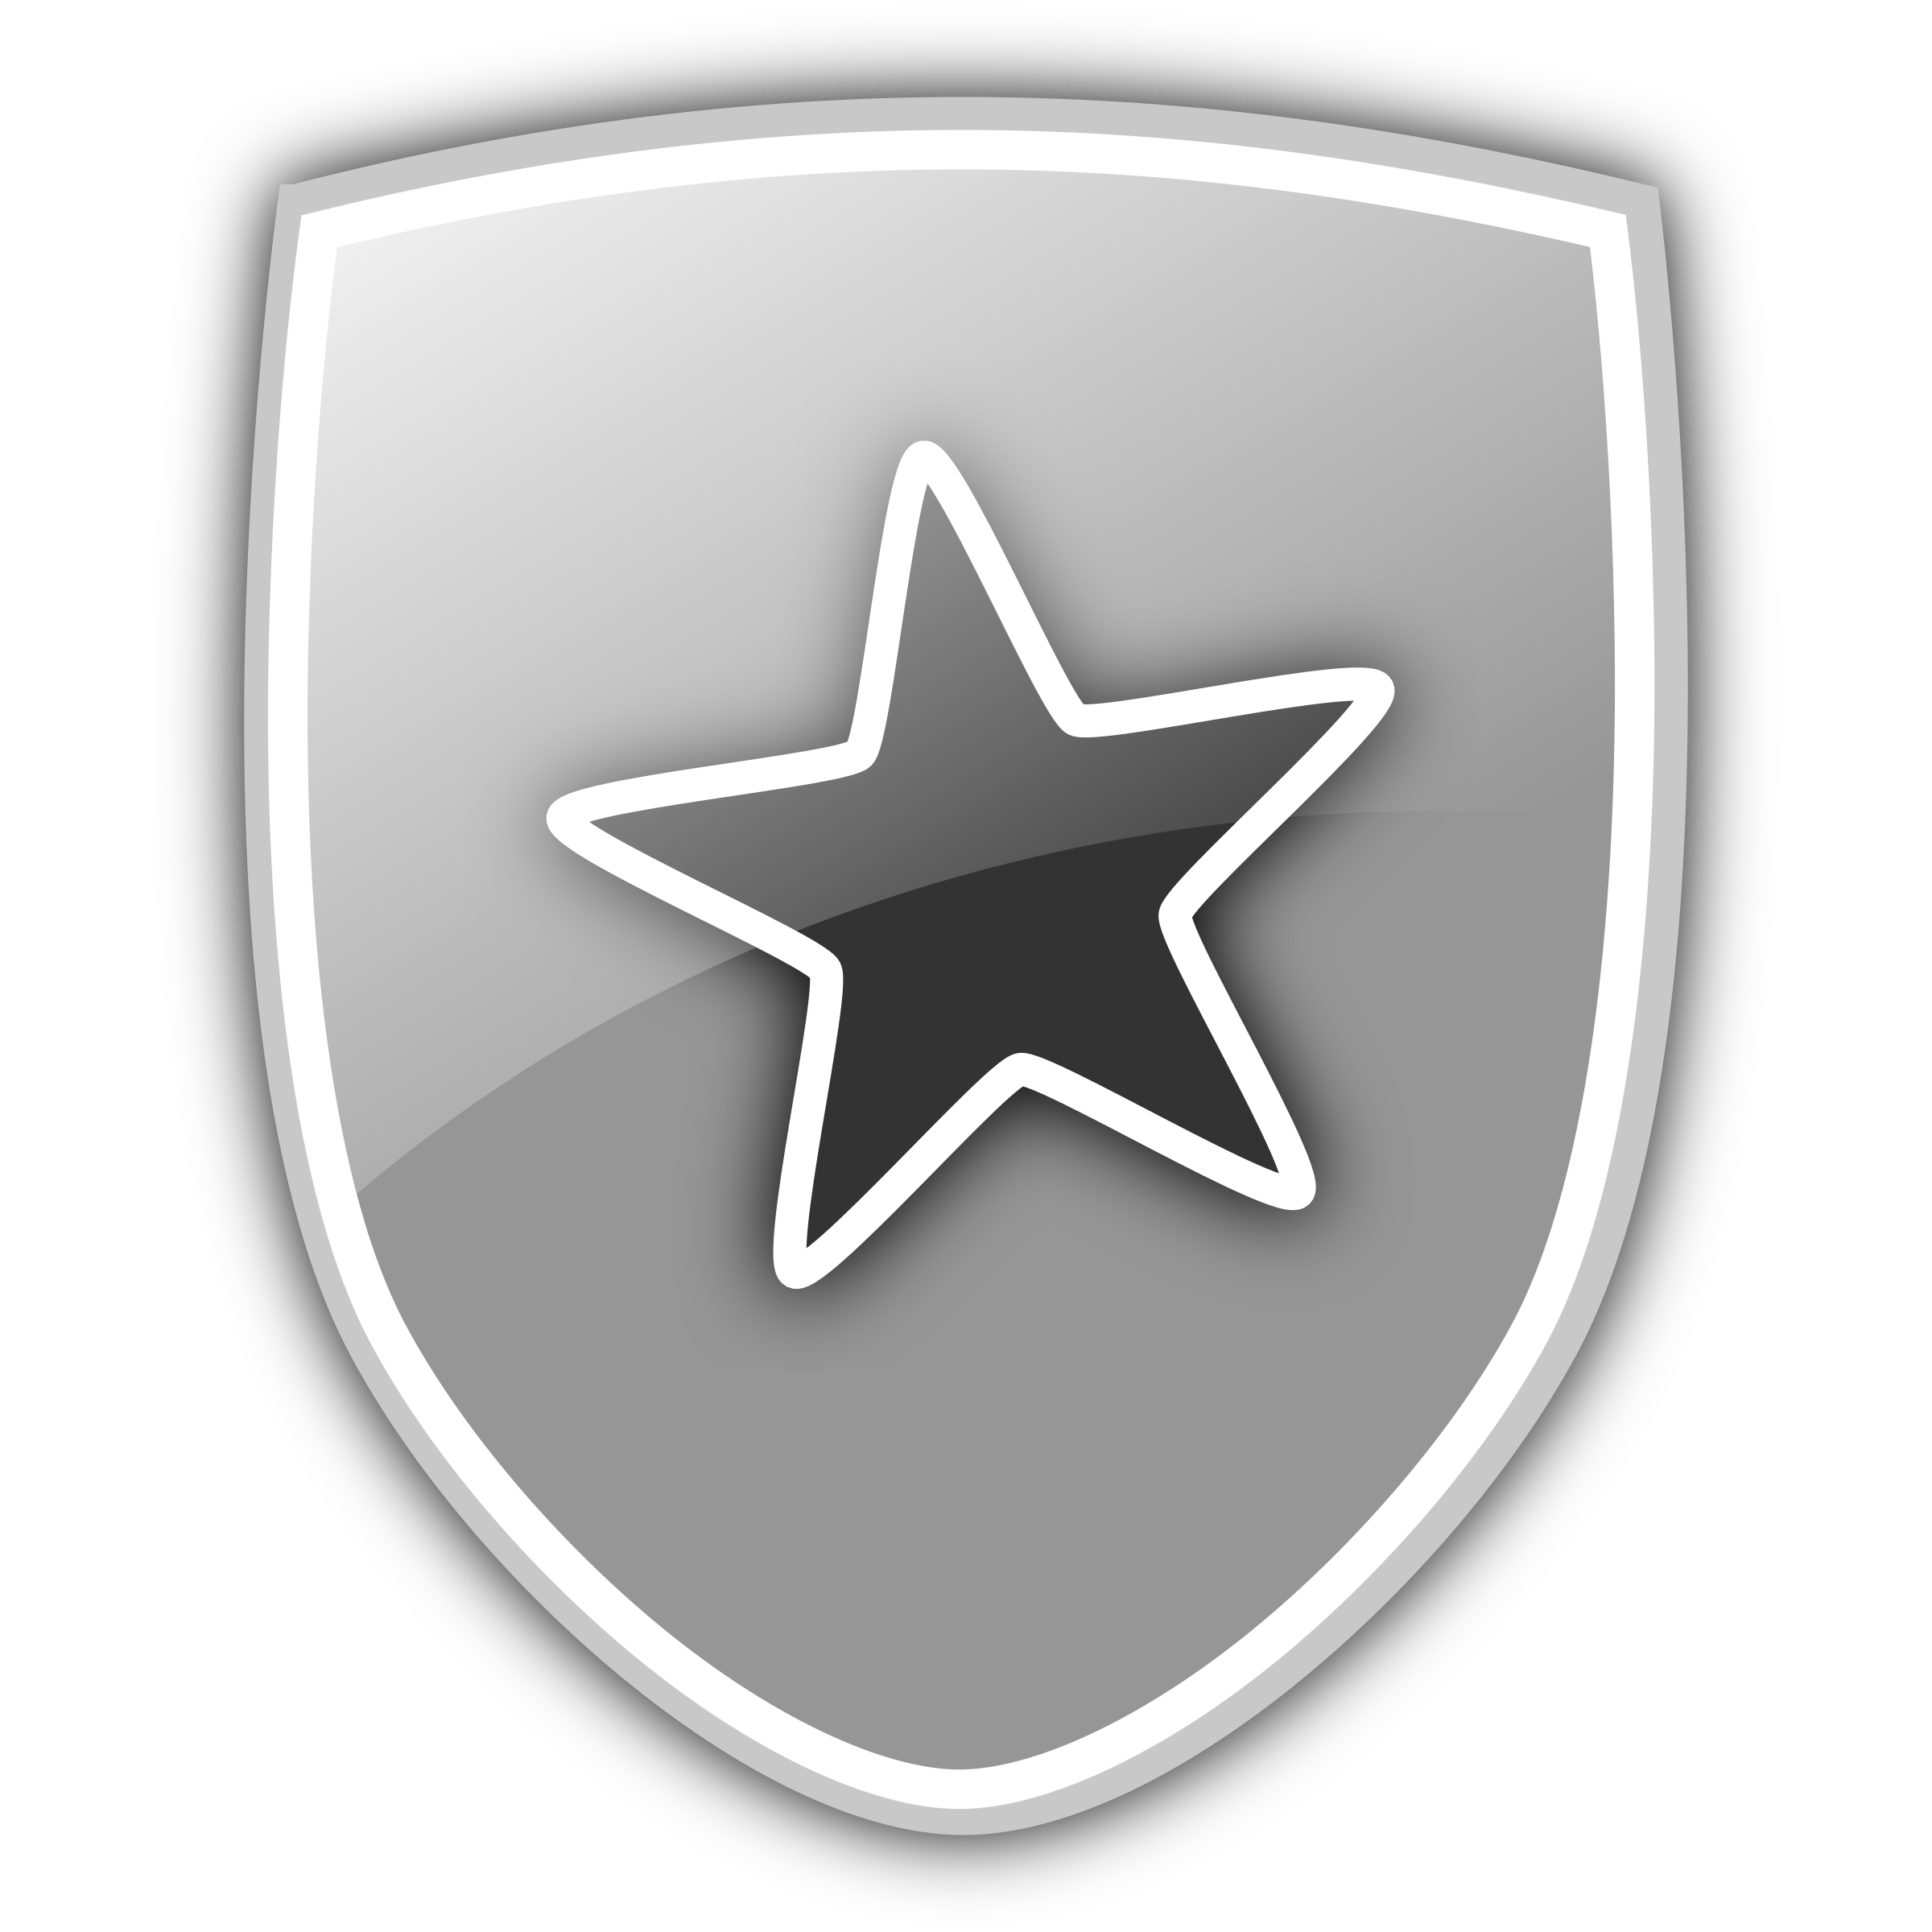 clipart shield black and white